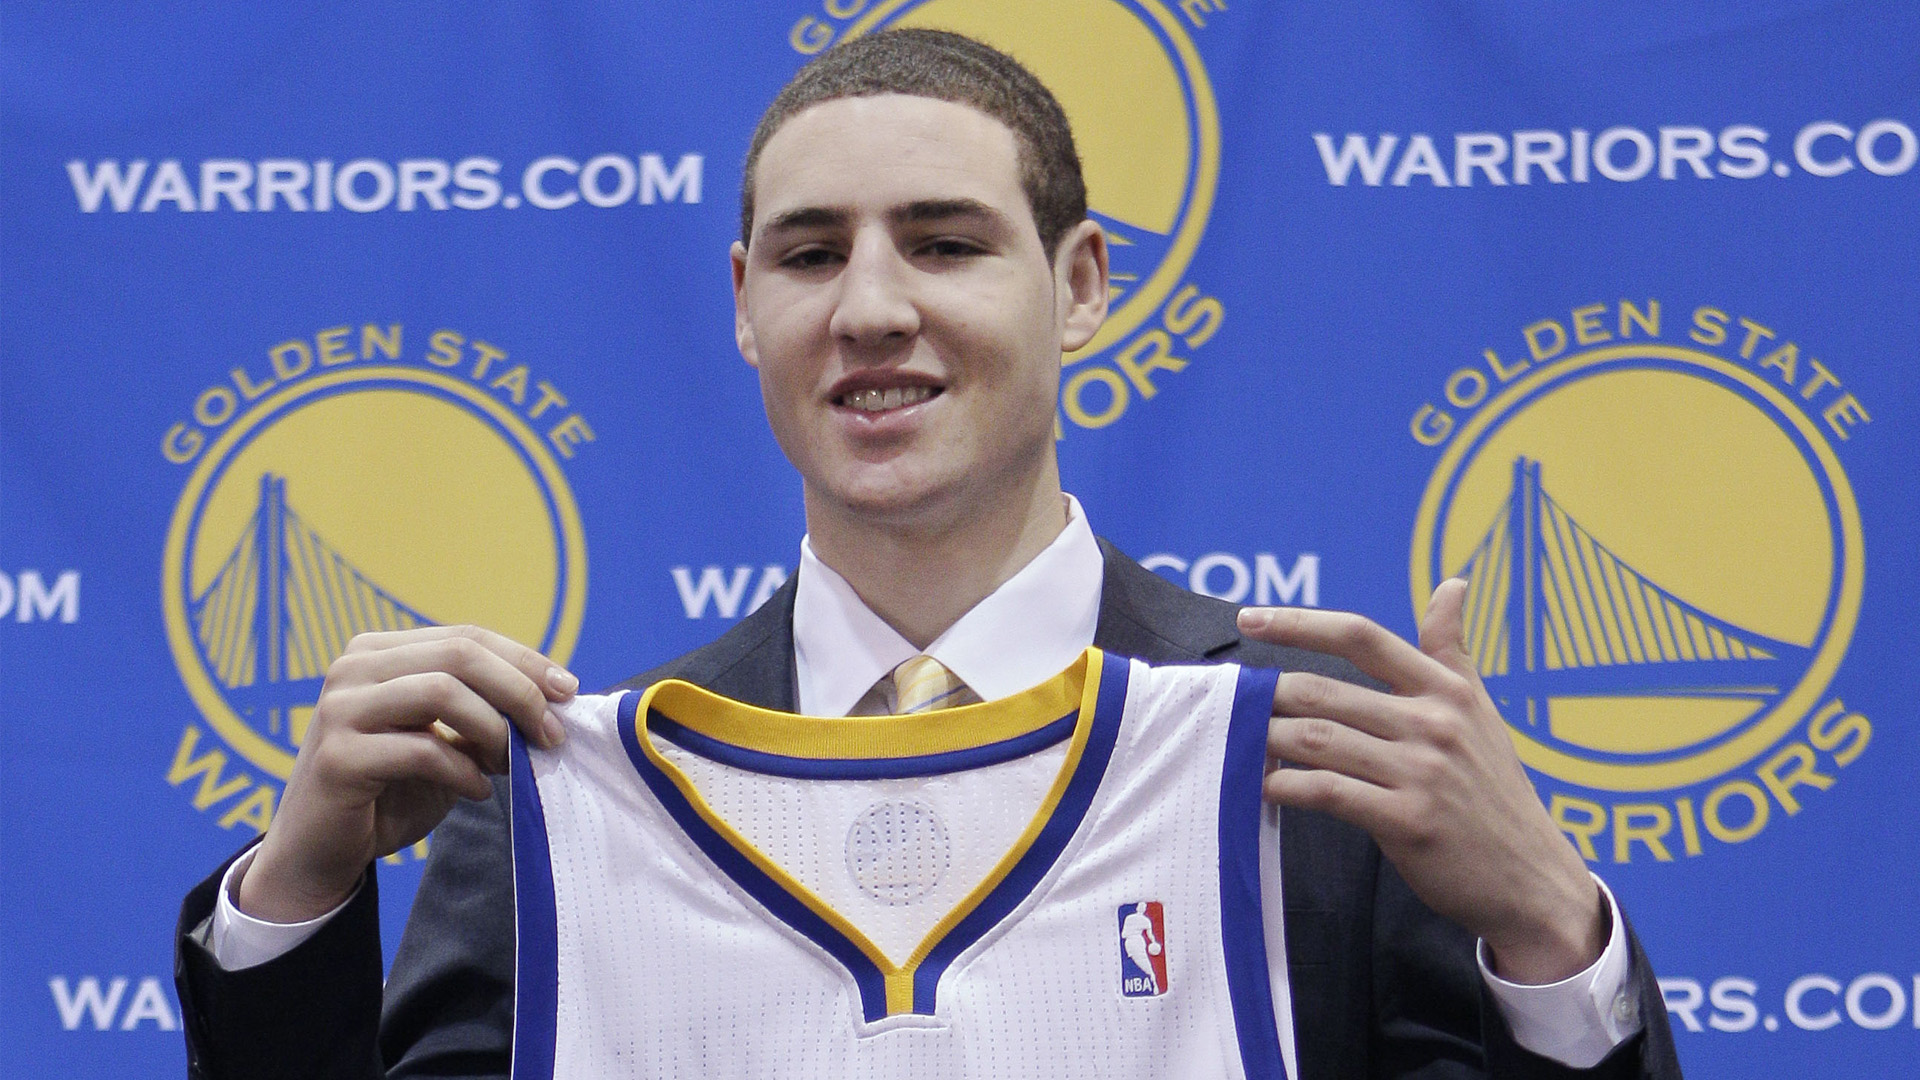 All-Access: Klay Thompson College Jersey Retirement 